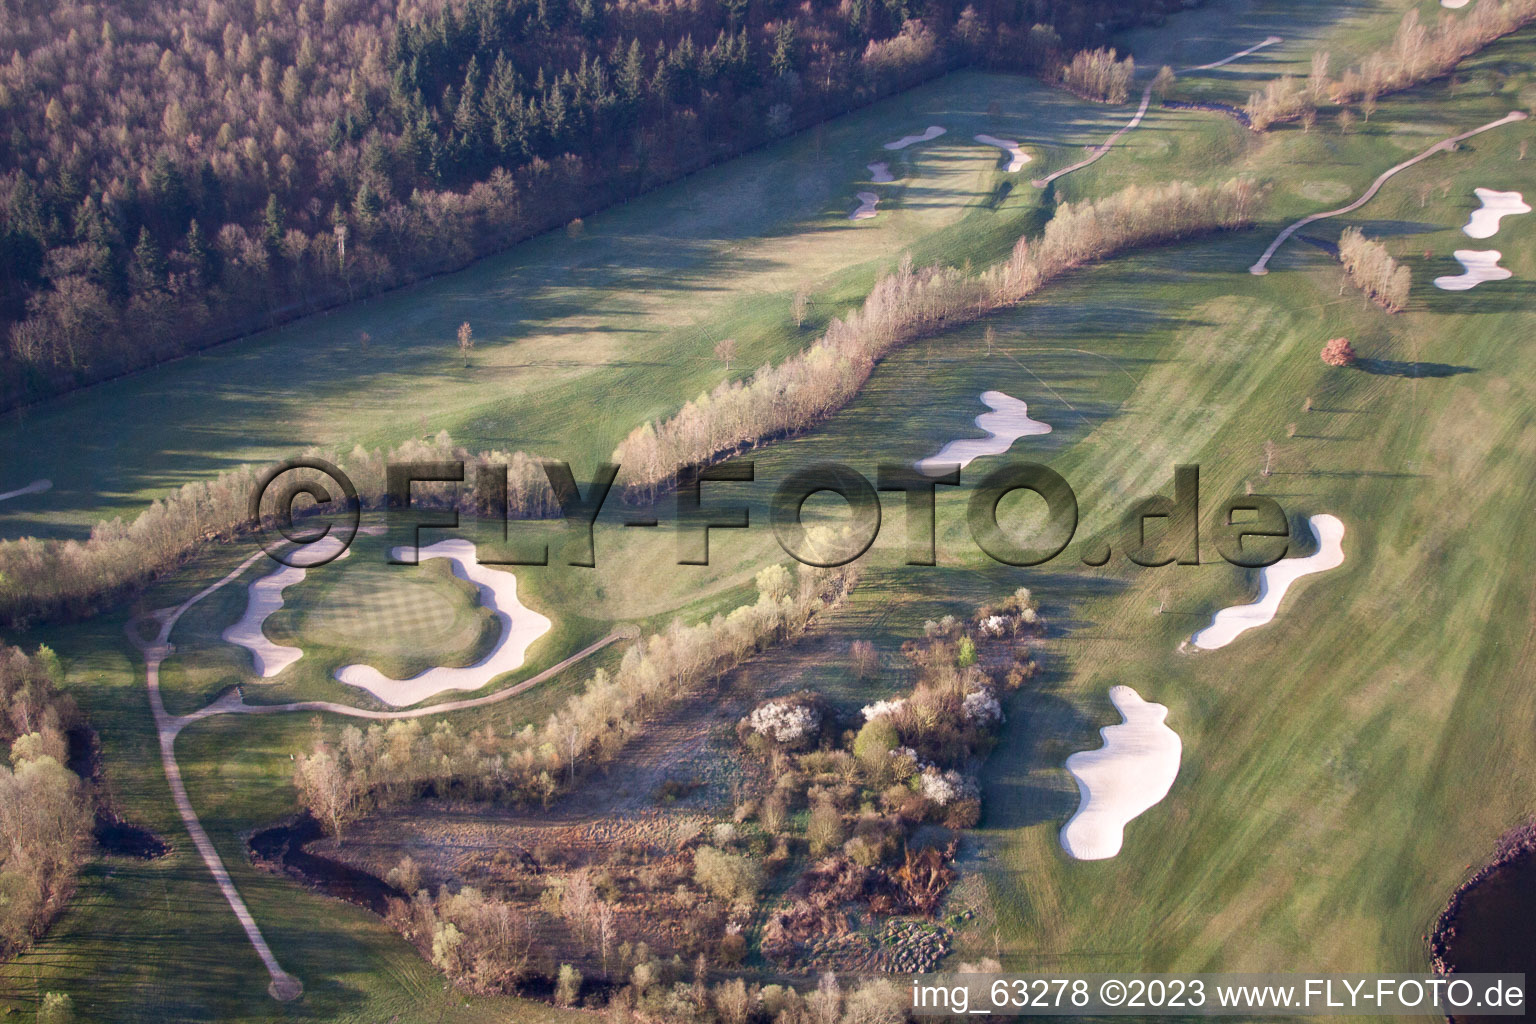 Drone recording of Dreihof Golf Club in Essingen in the state Rhineland-Palatinate, Germany